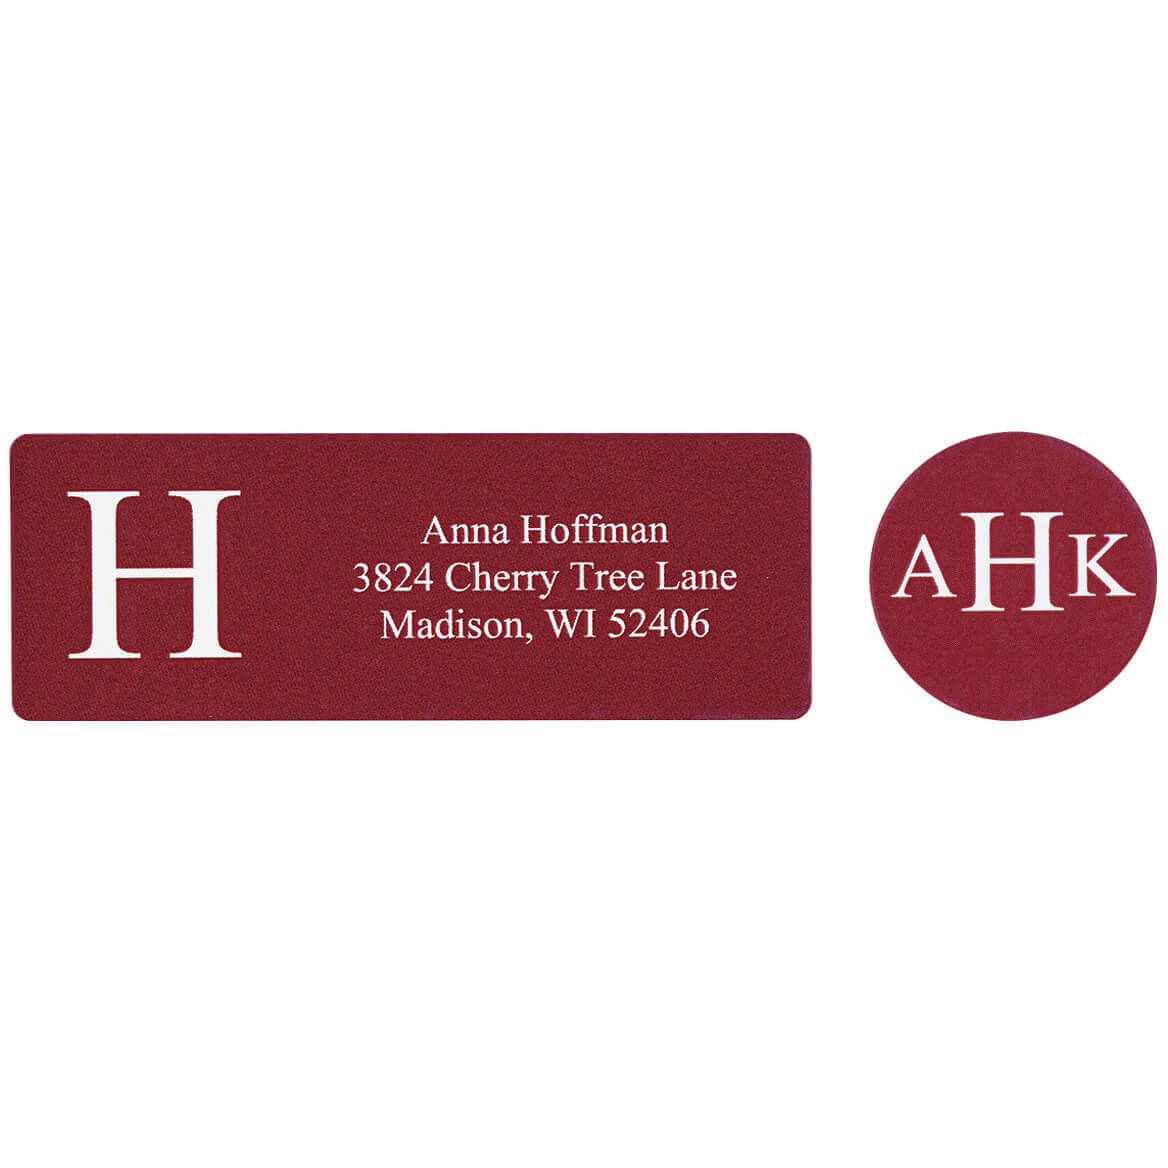 Personalized Monogrammed Classic Labels/Seals, Set of 20 + '-' + 373524